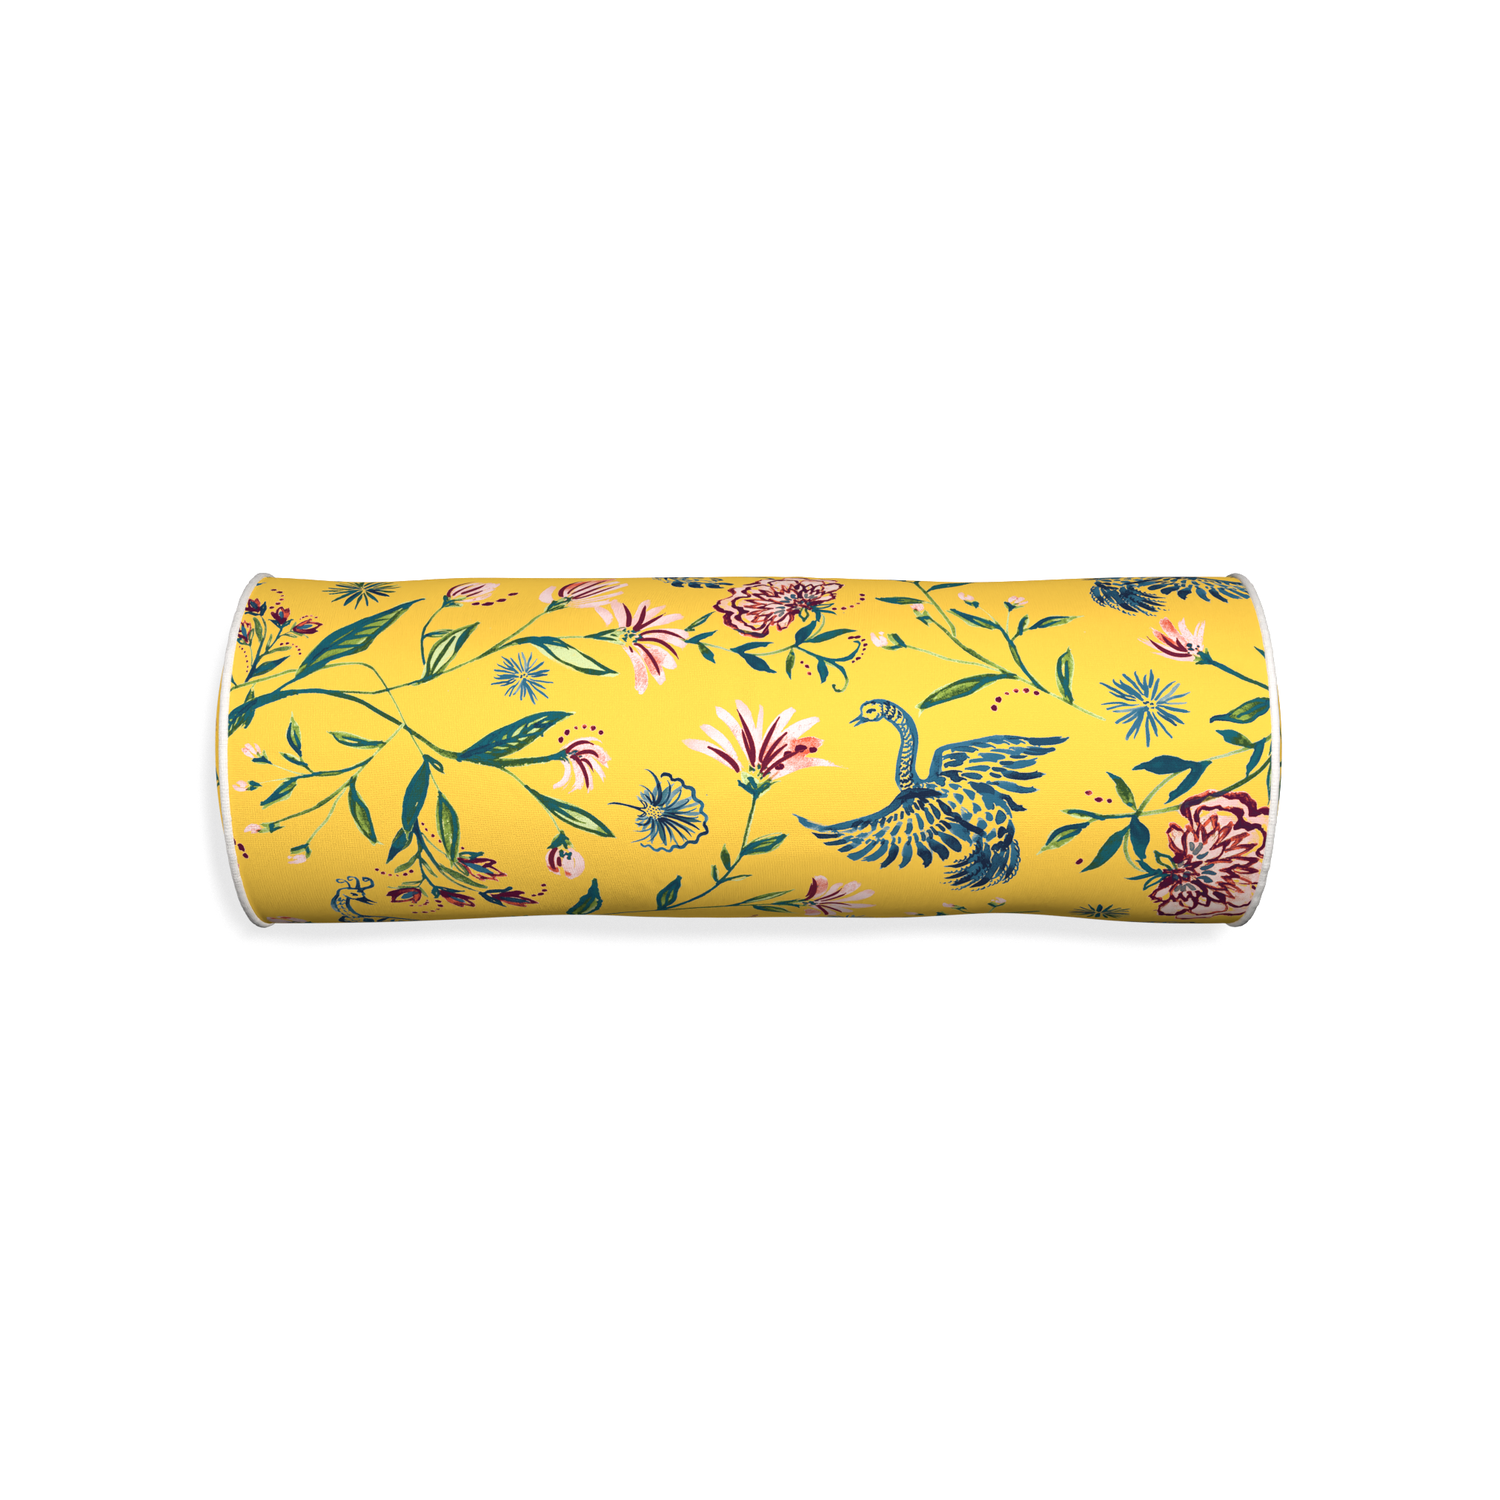 Bolster daphne canary custom pillow with snow piping on white background